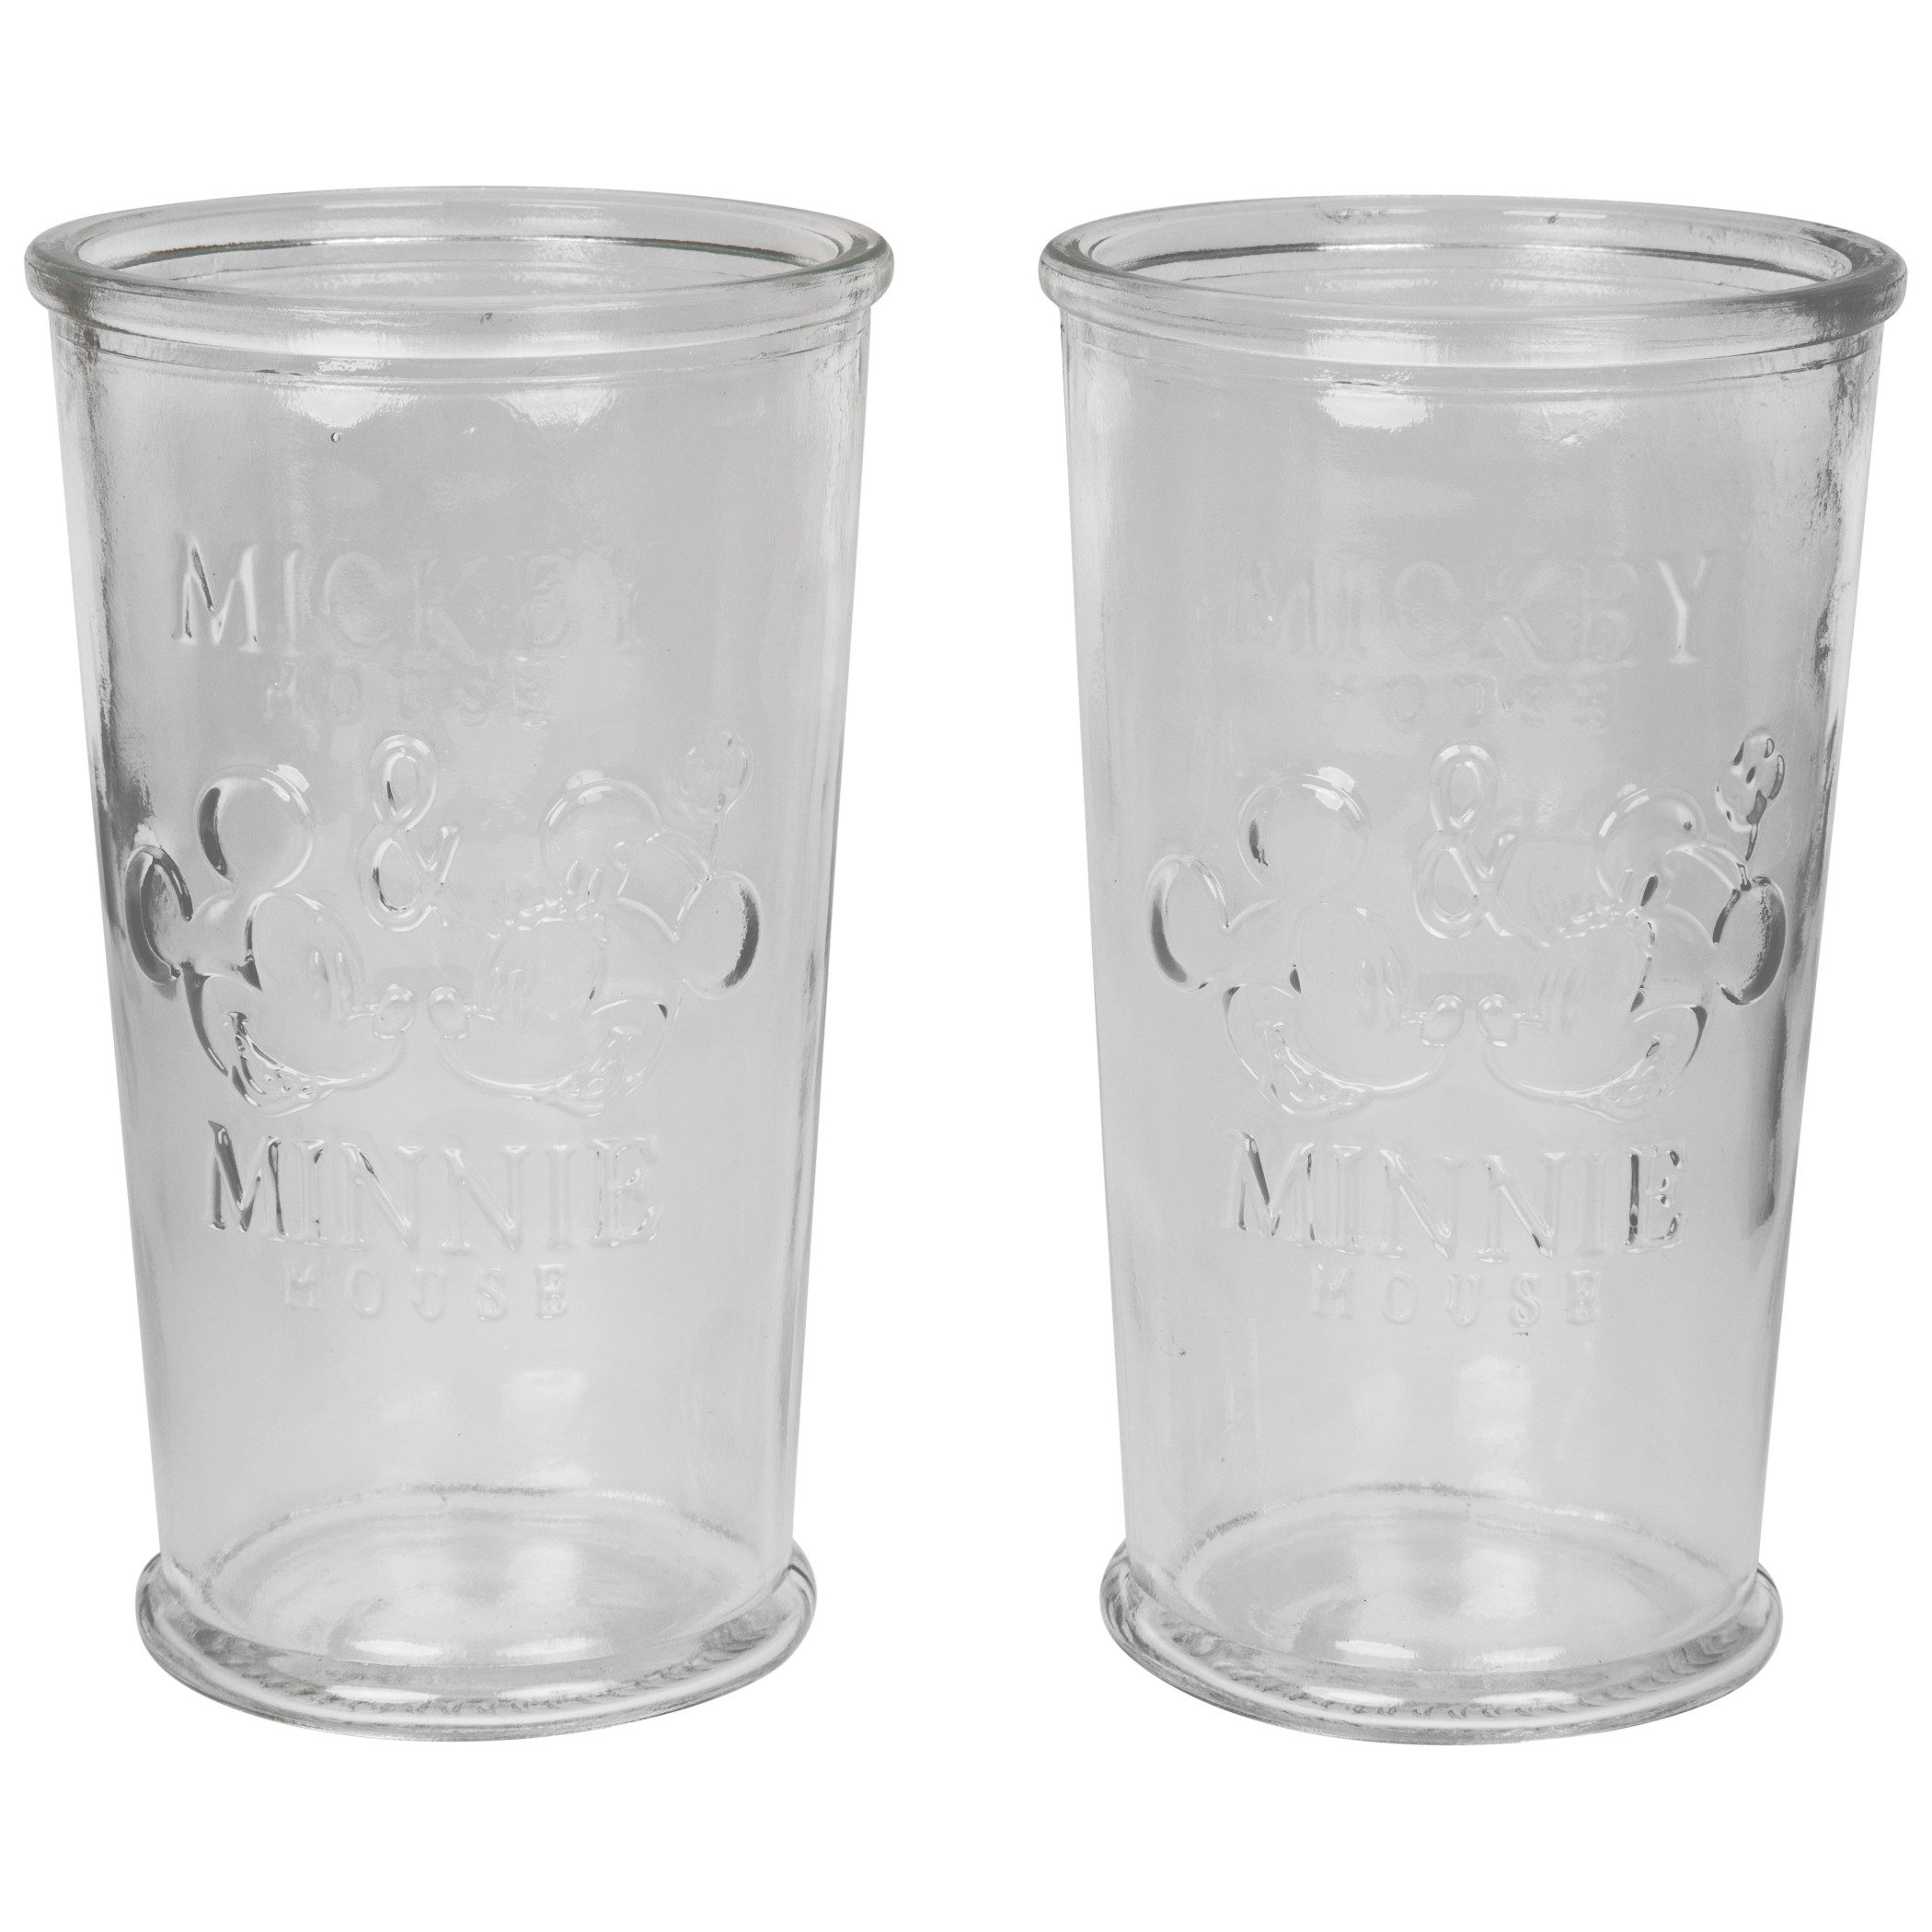 Disney Mickey and Minnie Mouse Set of 2 Glasses